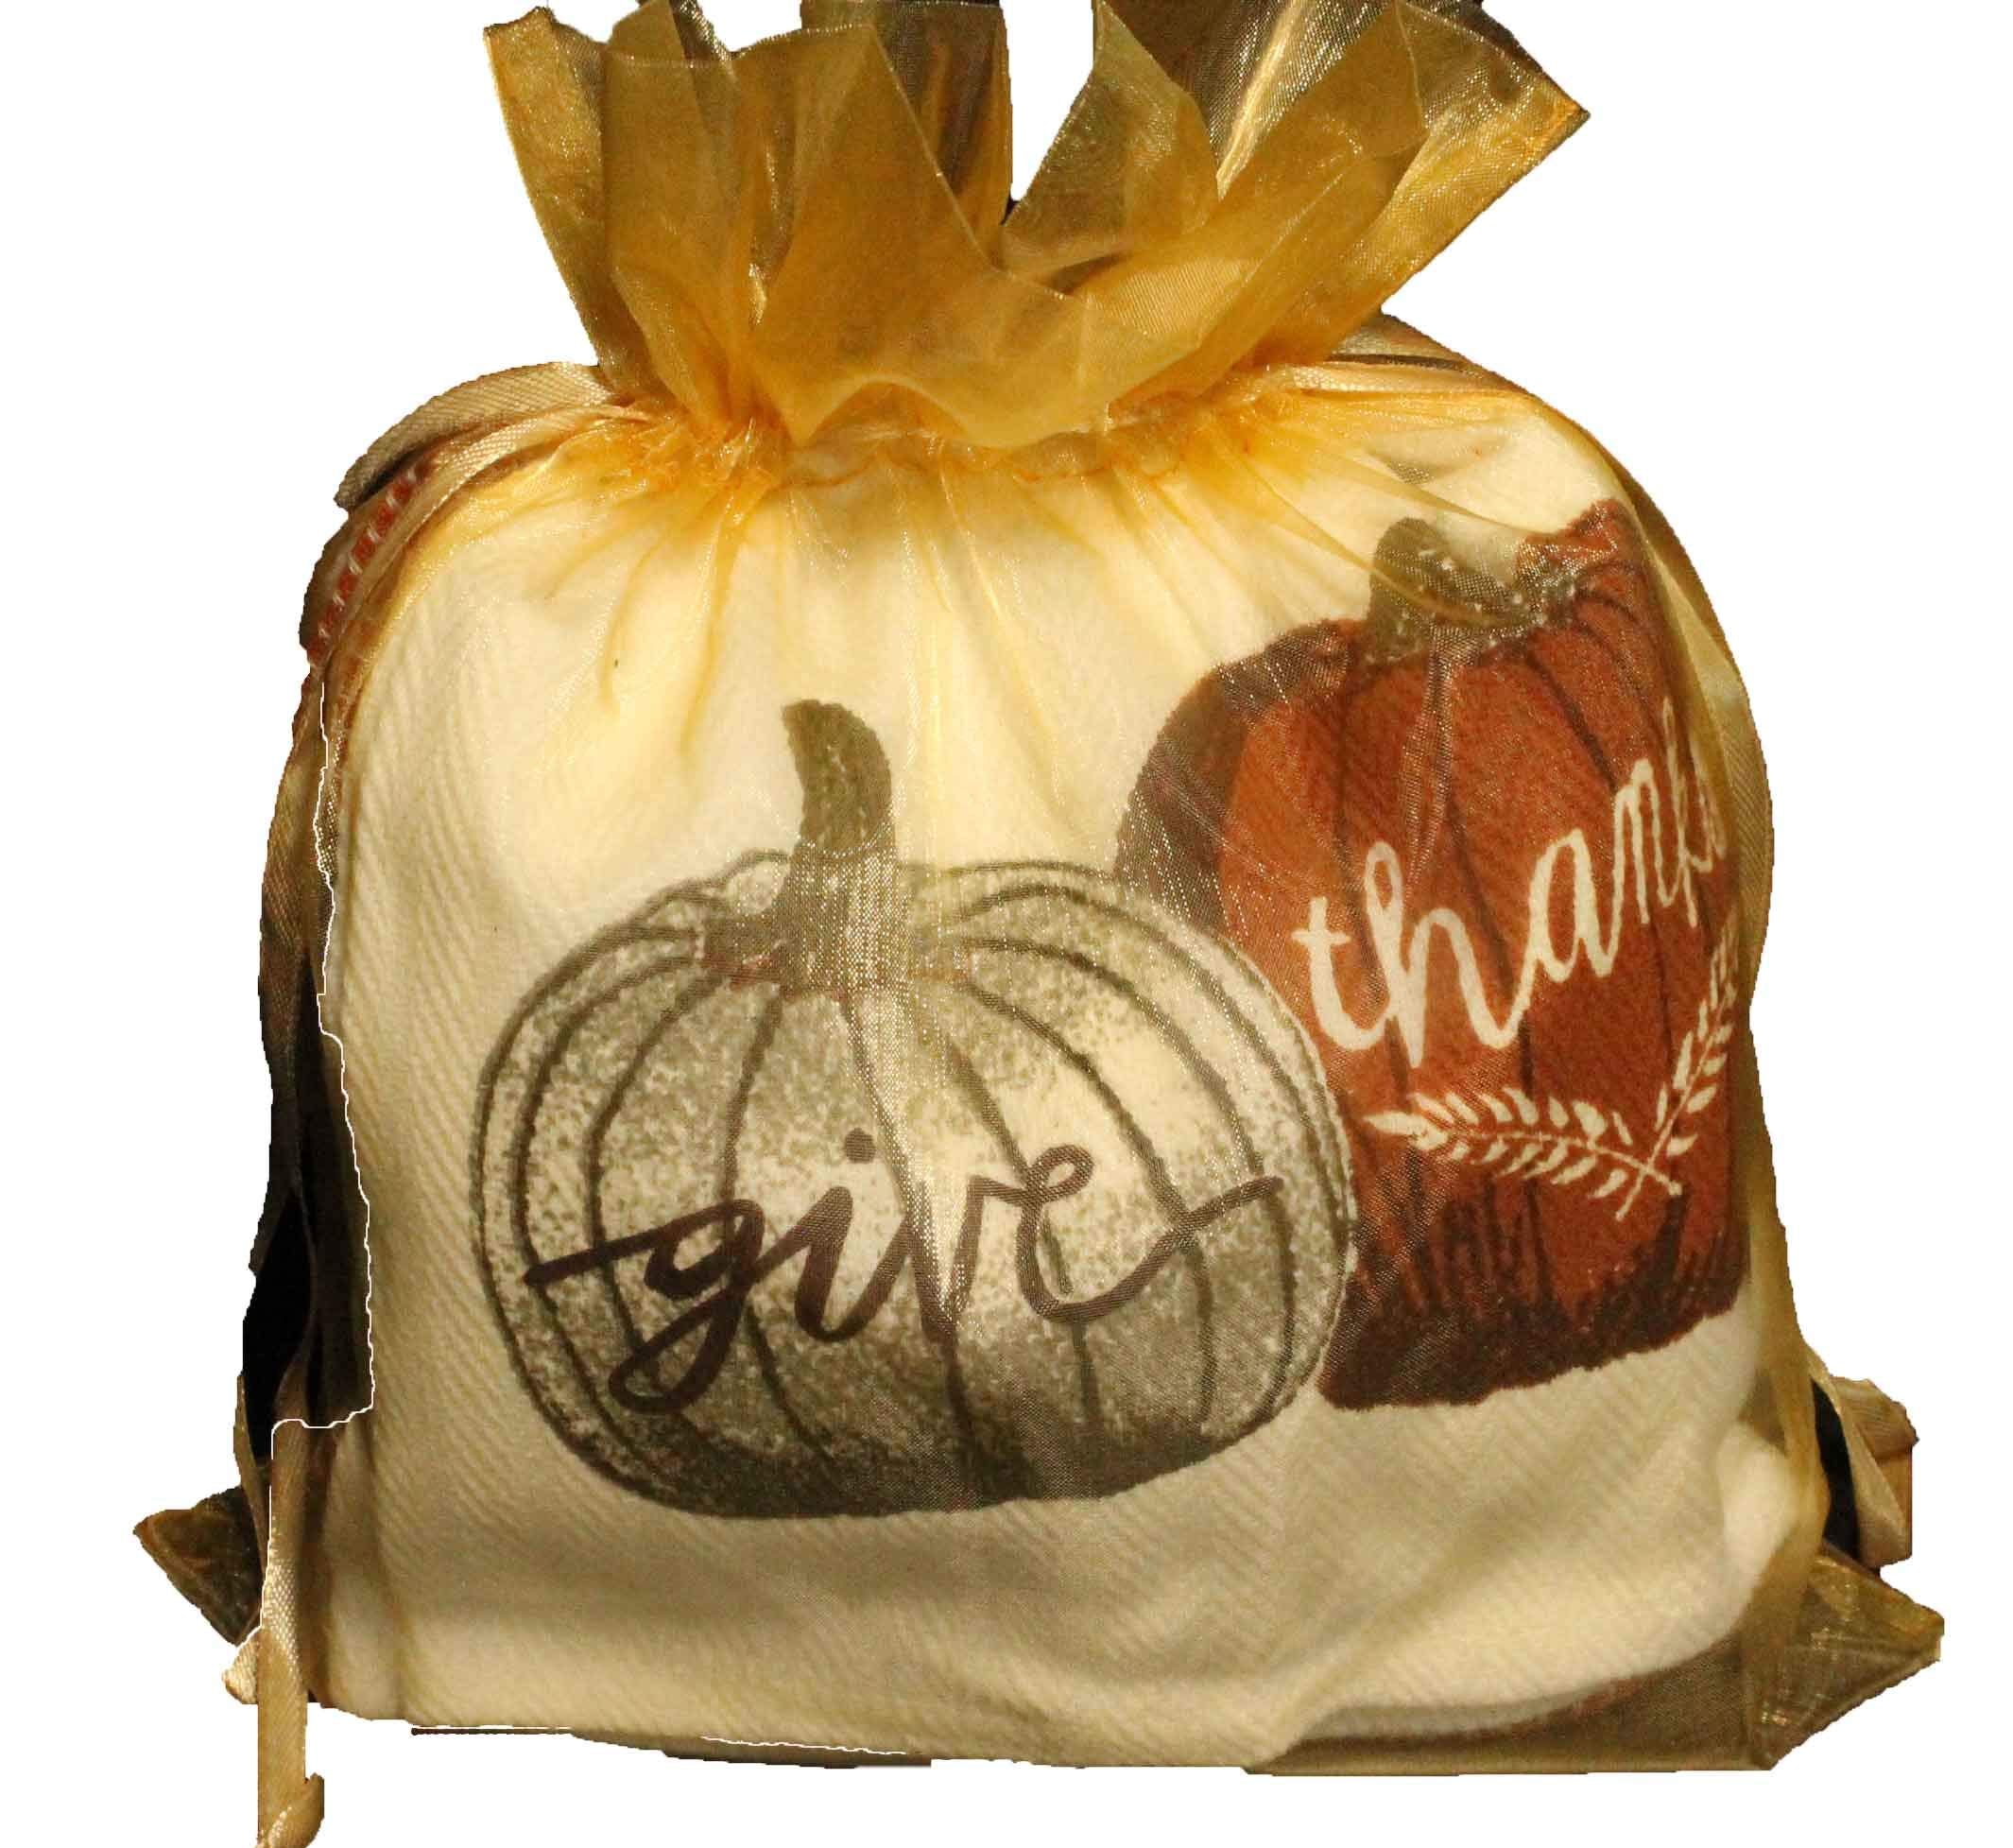 Two 2-Packs of Fall Kitchen Towels - Thanksgiving Kitchen Towels 100% Cotton w/Turkey, Pumpkins- Comes in Organza Gift Bag